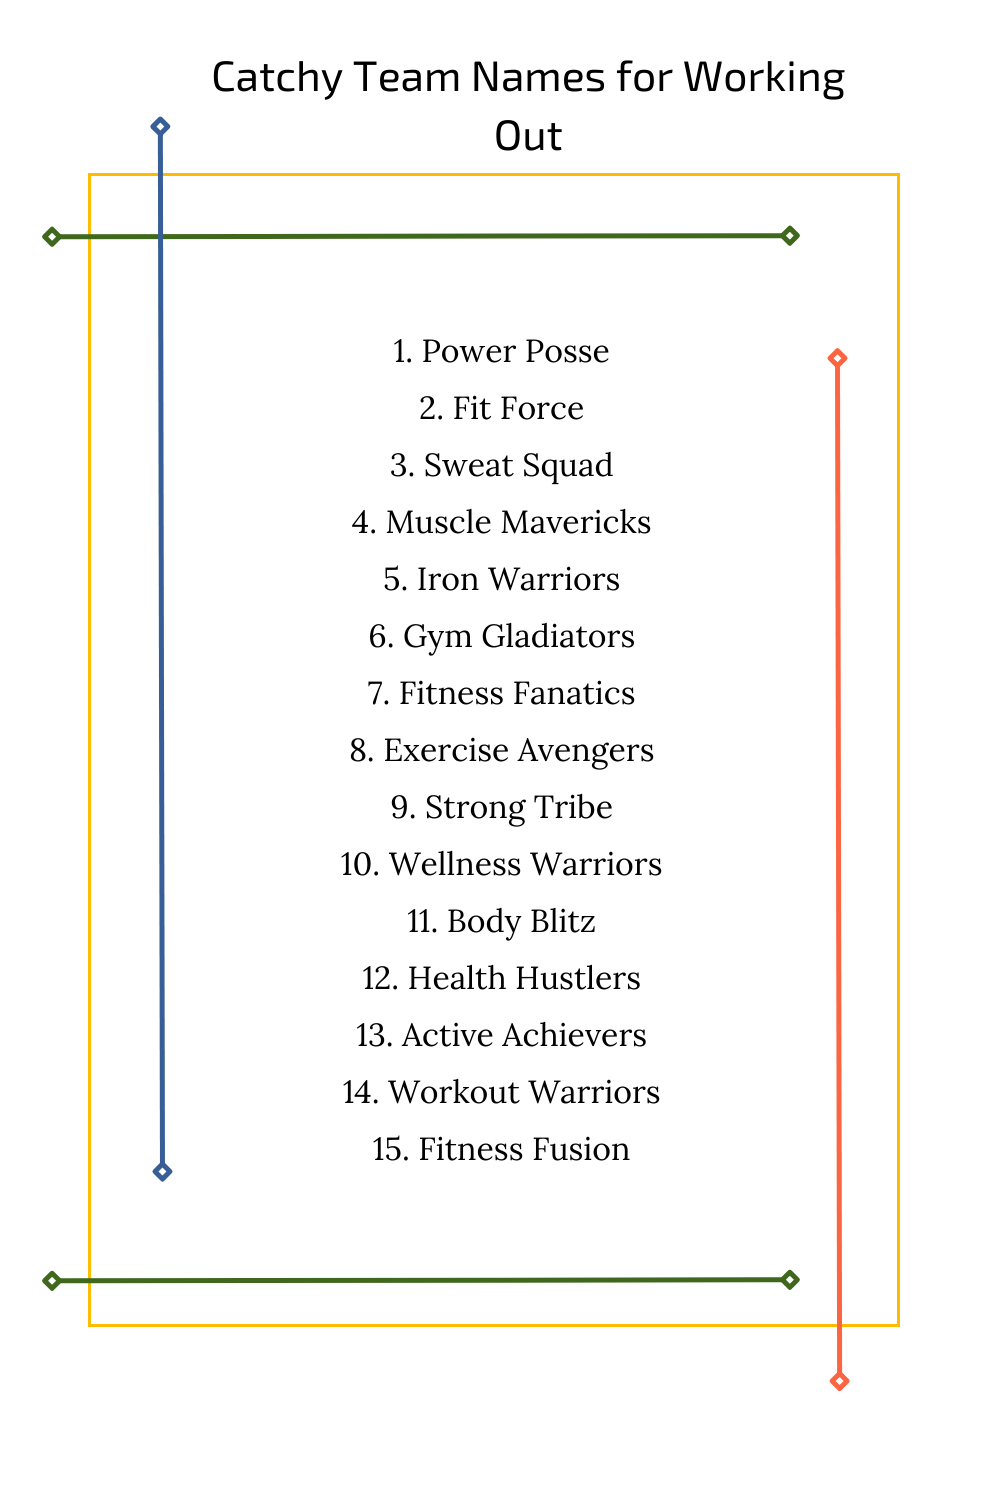 Catchy Team Names for Working Out